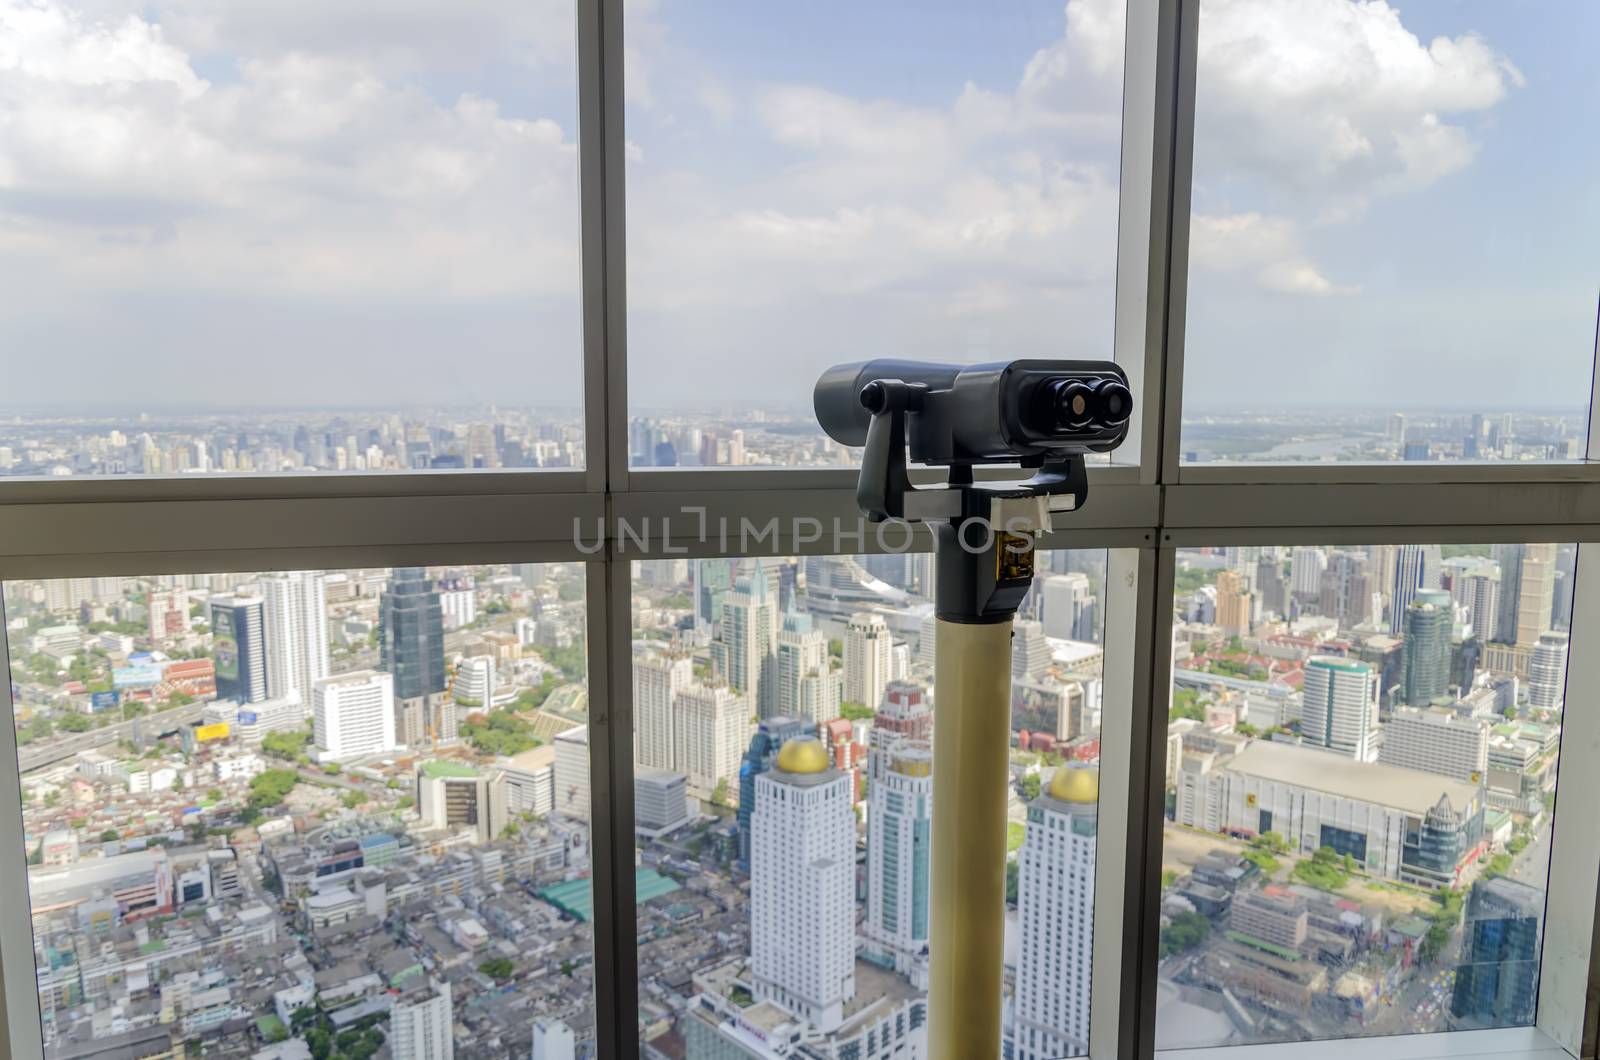 bangkok view and telescope from Baiyoke Tower II on 3 July 2014 BANGKOK - July 3: Baiyoke Tower II is the tallest building in Thailand with 328.4 m. july 3, 2014 in Bangkok, Thailand